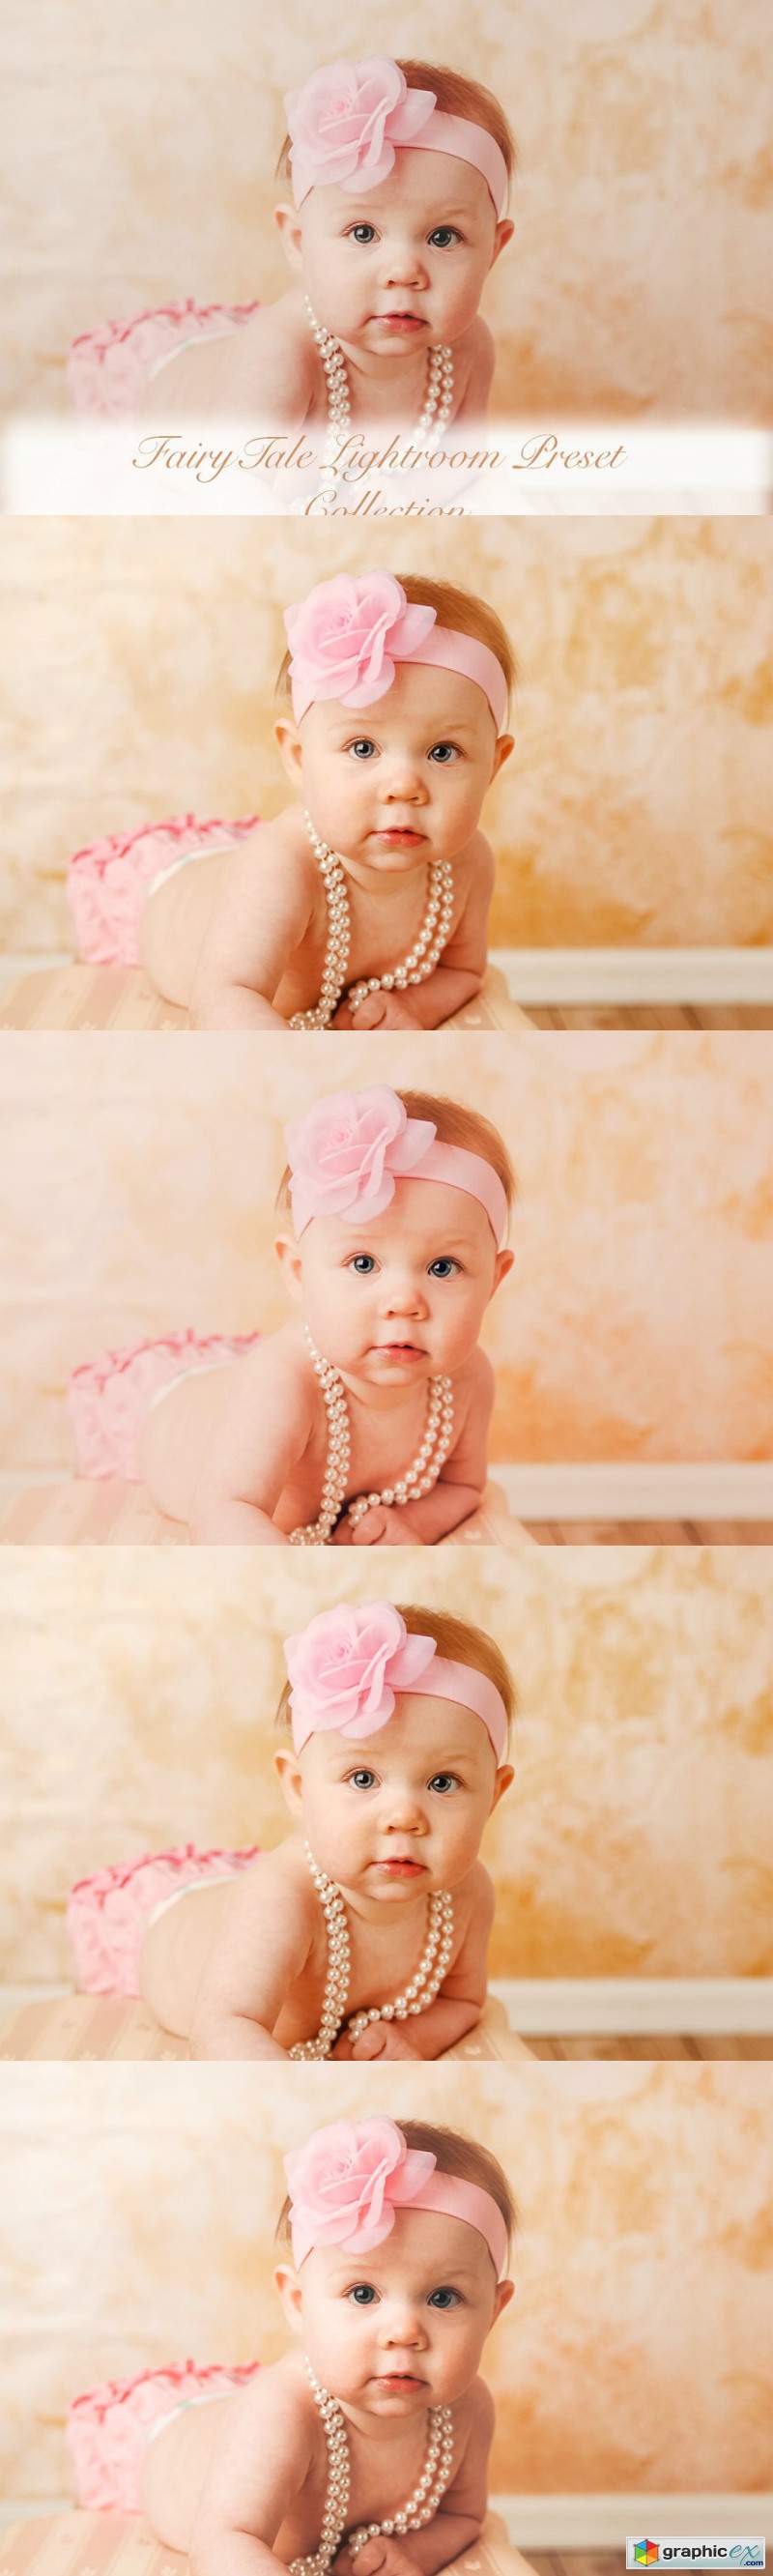 Family Lightroom Presets Collection